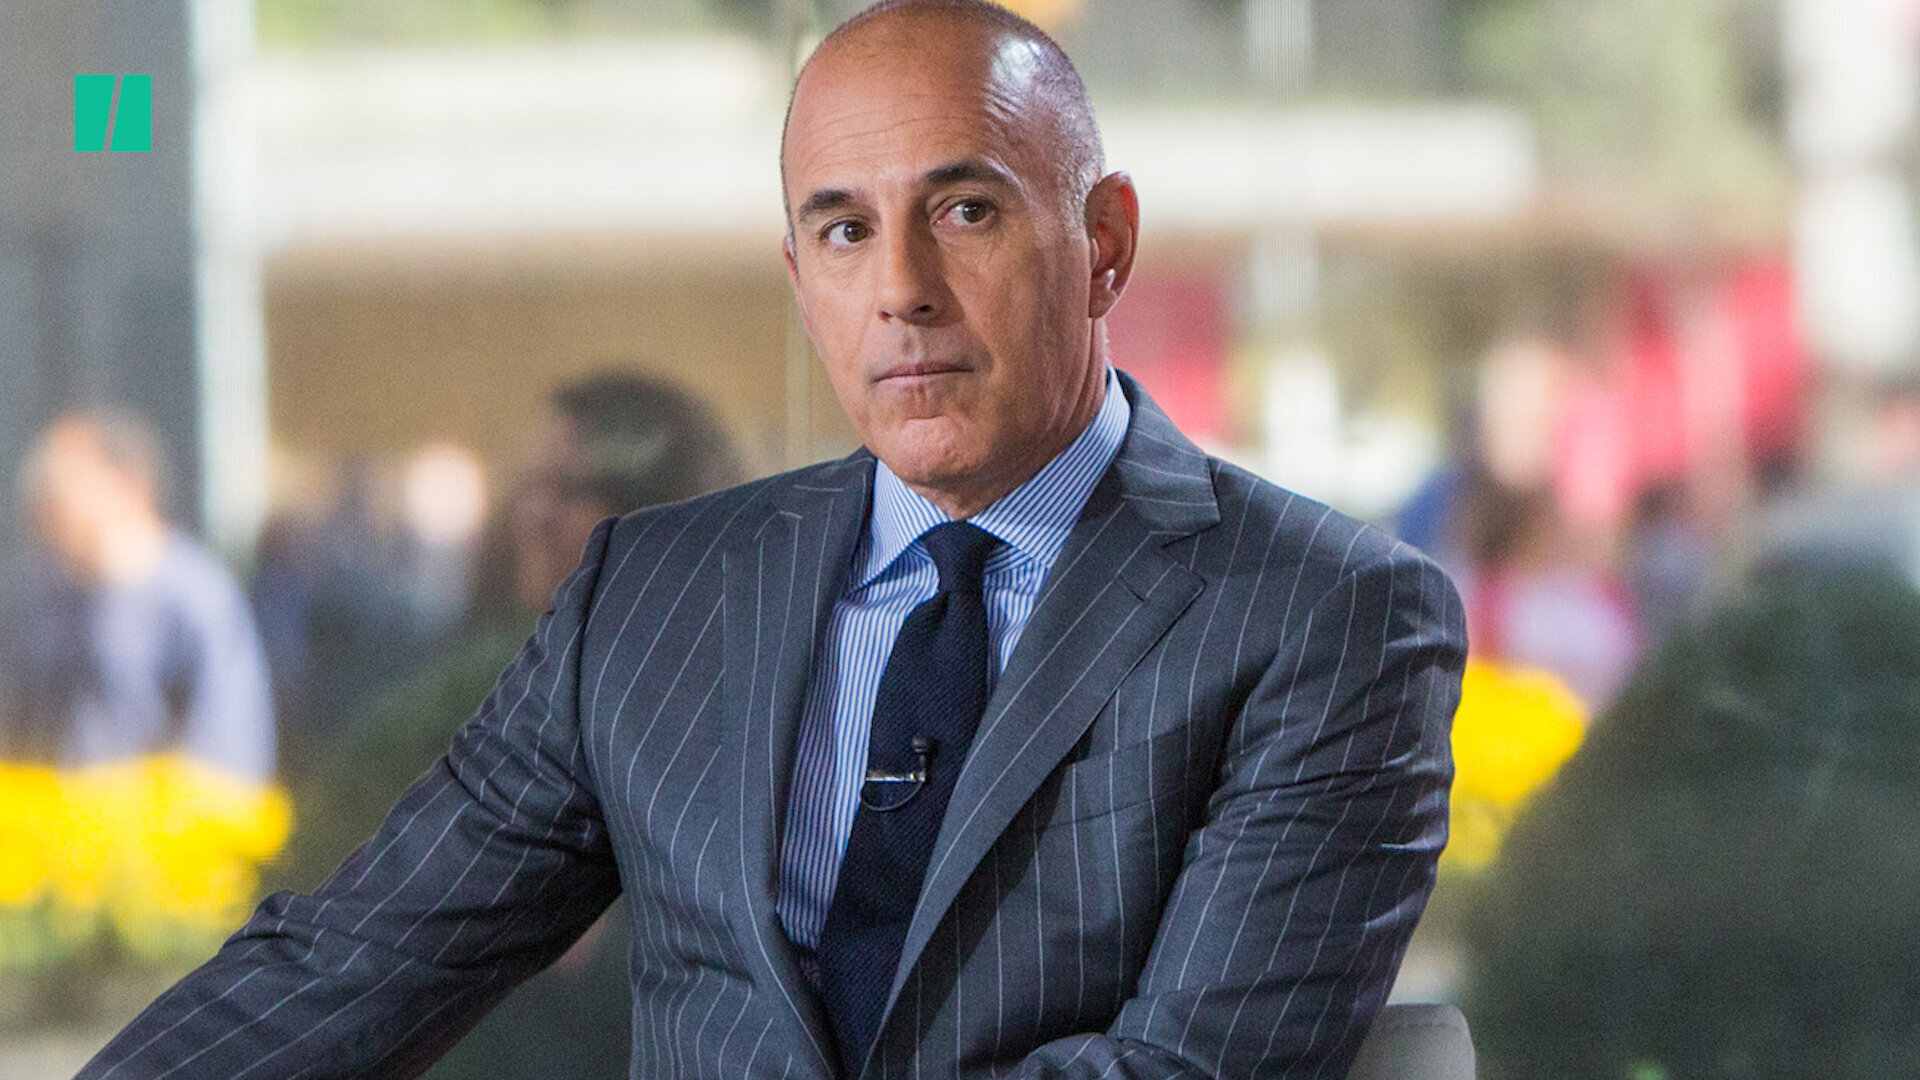 Former Today Show Host Matt Lauer Accused Of Rape HuffPost Videos